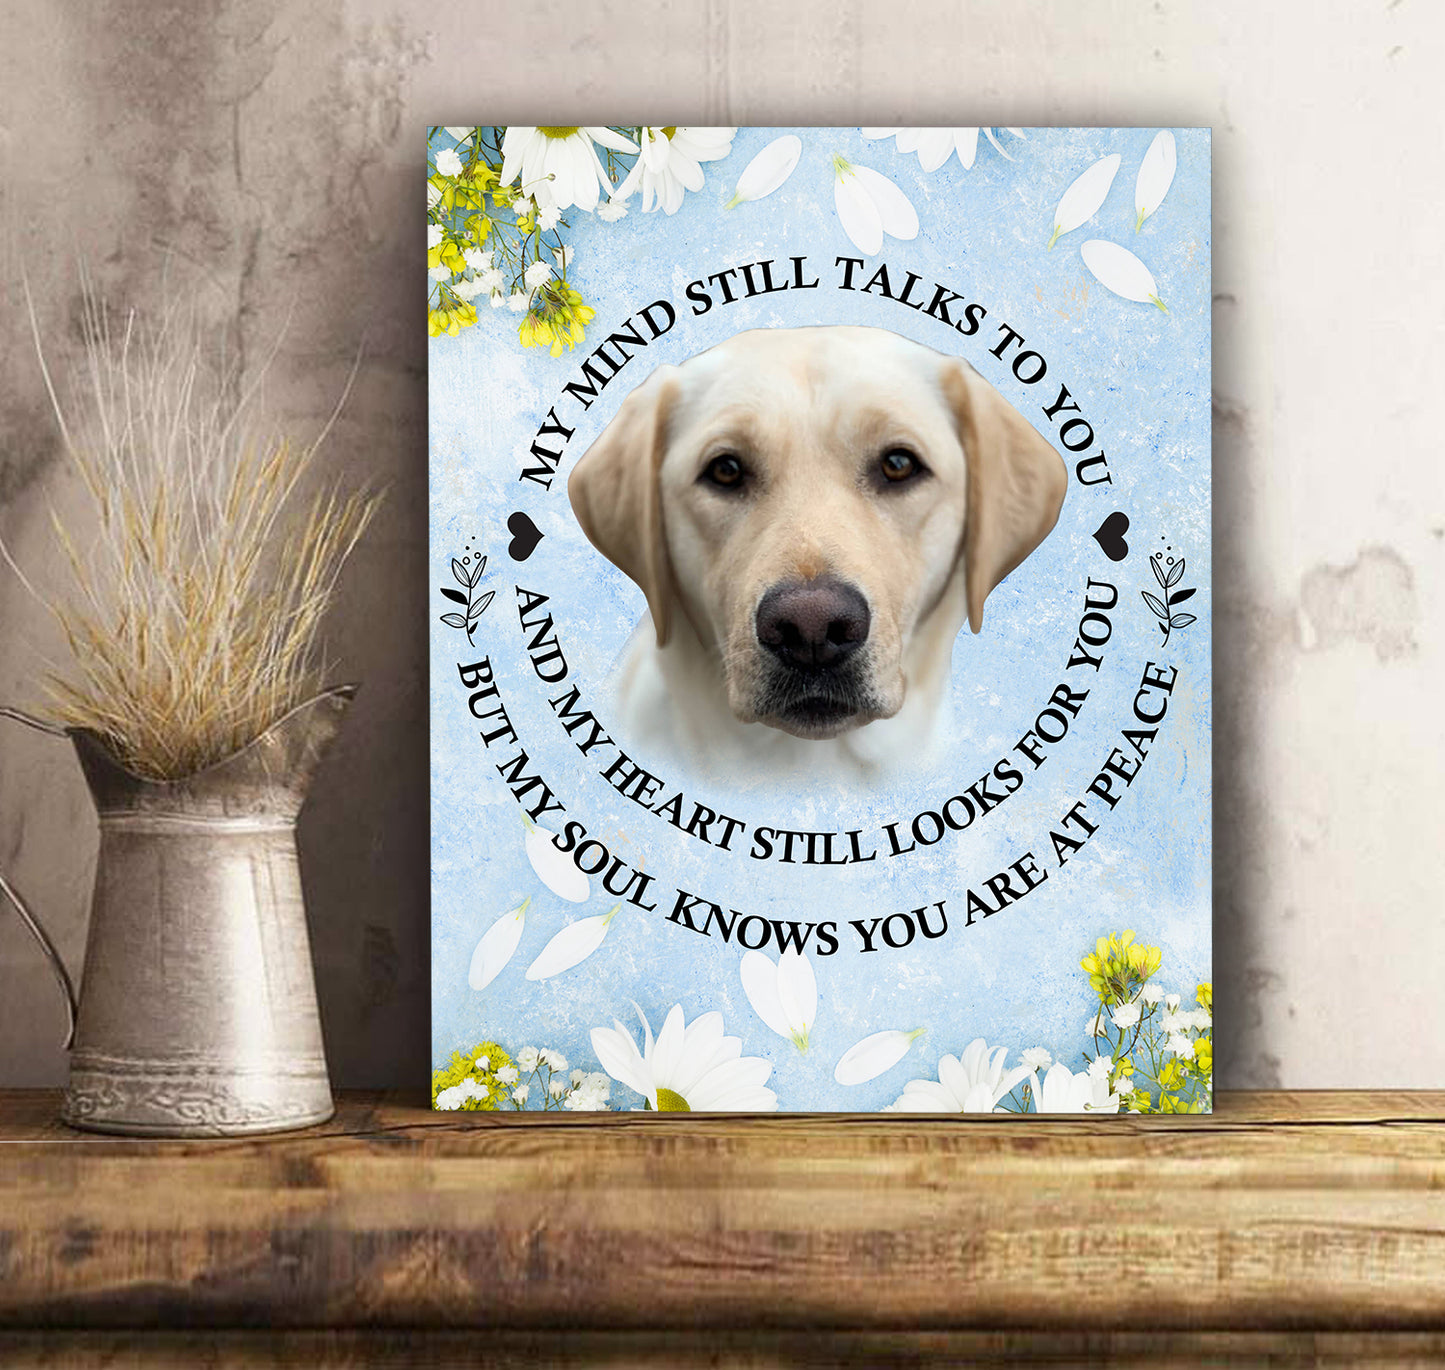 Custom personalized dog memorial photo to canvas Pet remembrance print wall art gift idea for dog mom dad pet lovers with pictures on - My mind still talks to you - PersonalizedWitch